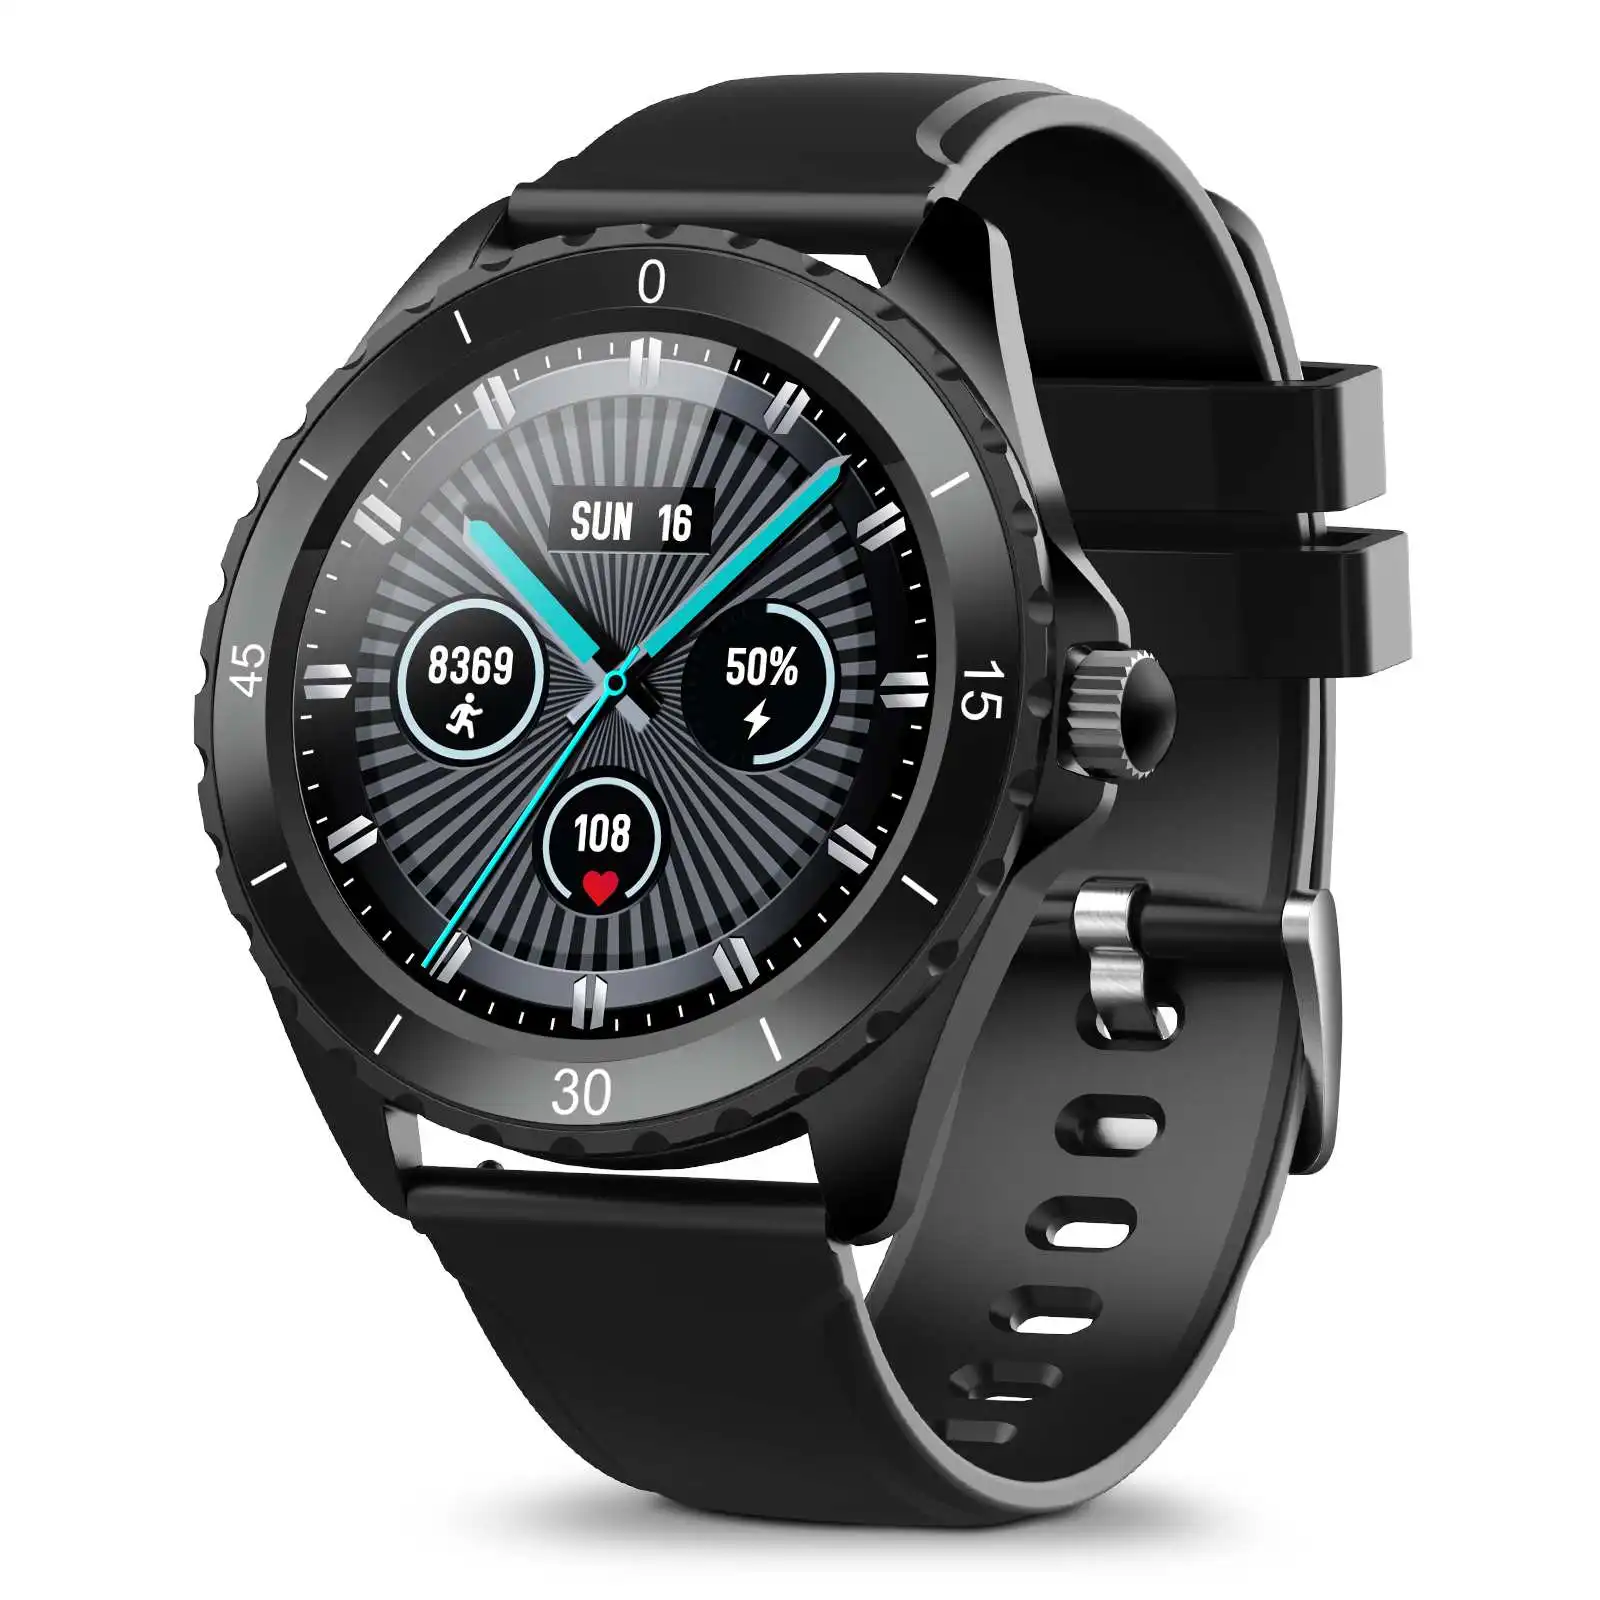 

C520 Smart Watch Fitness Tracker Smartwatch Heart Rate Sleep Monitoring 24 Sports Mode Men Women Smart Watches for Android iOS